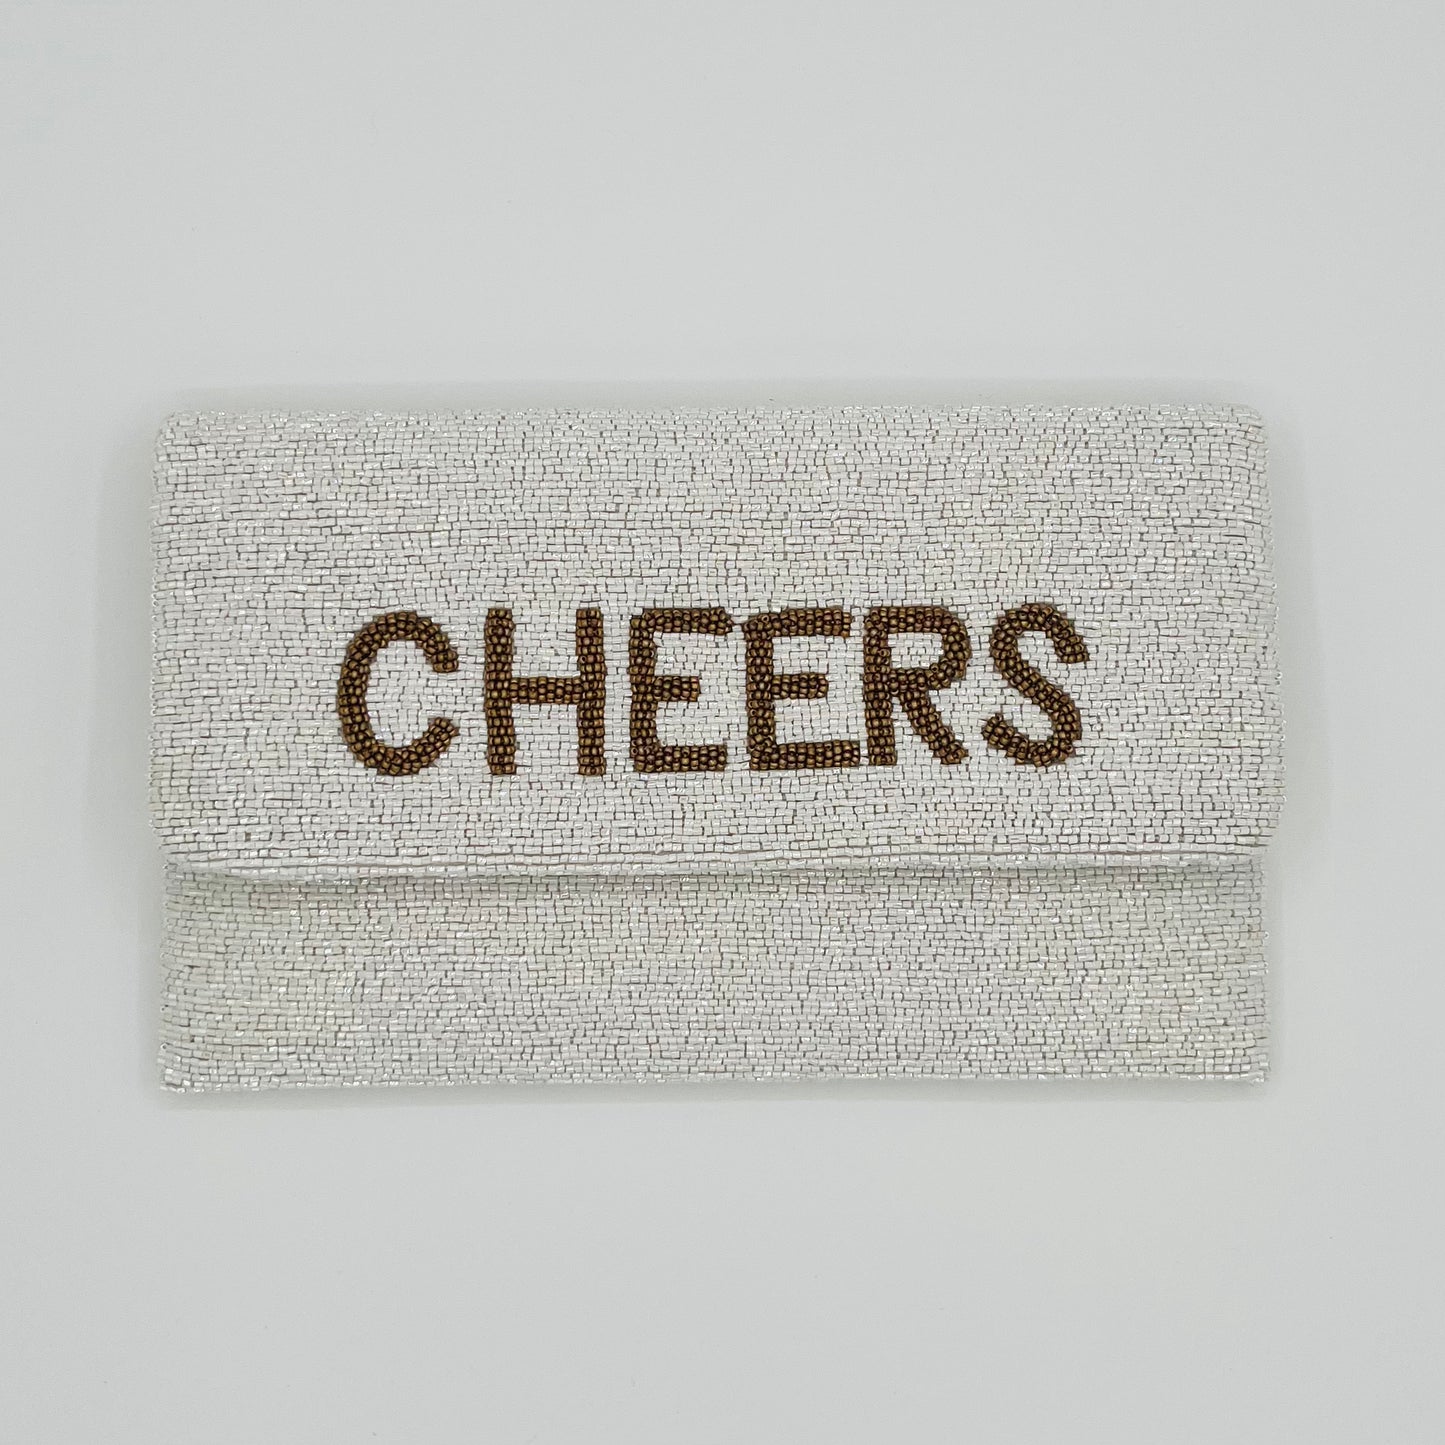 Large Cheers Foldover w Chain